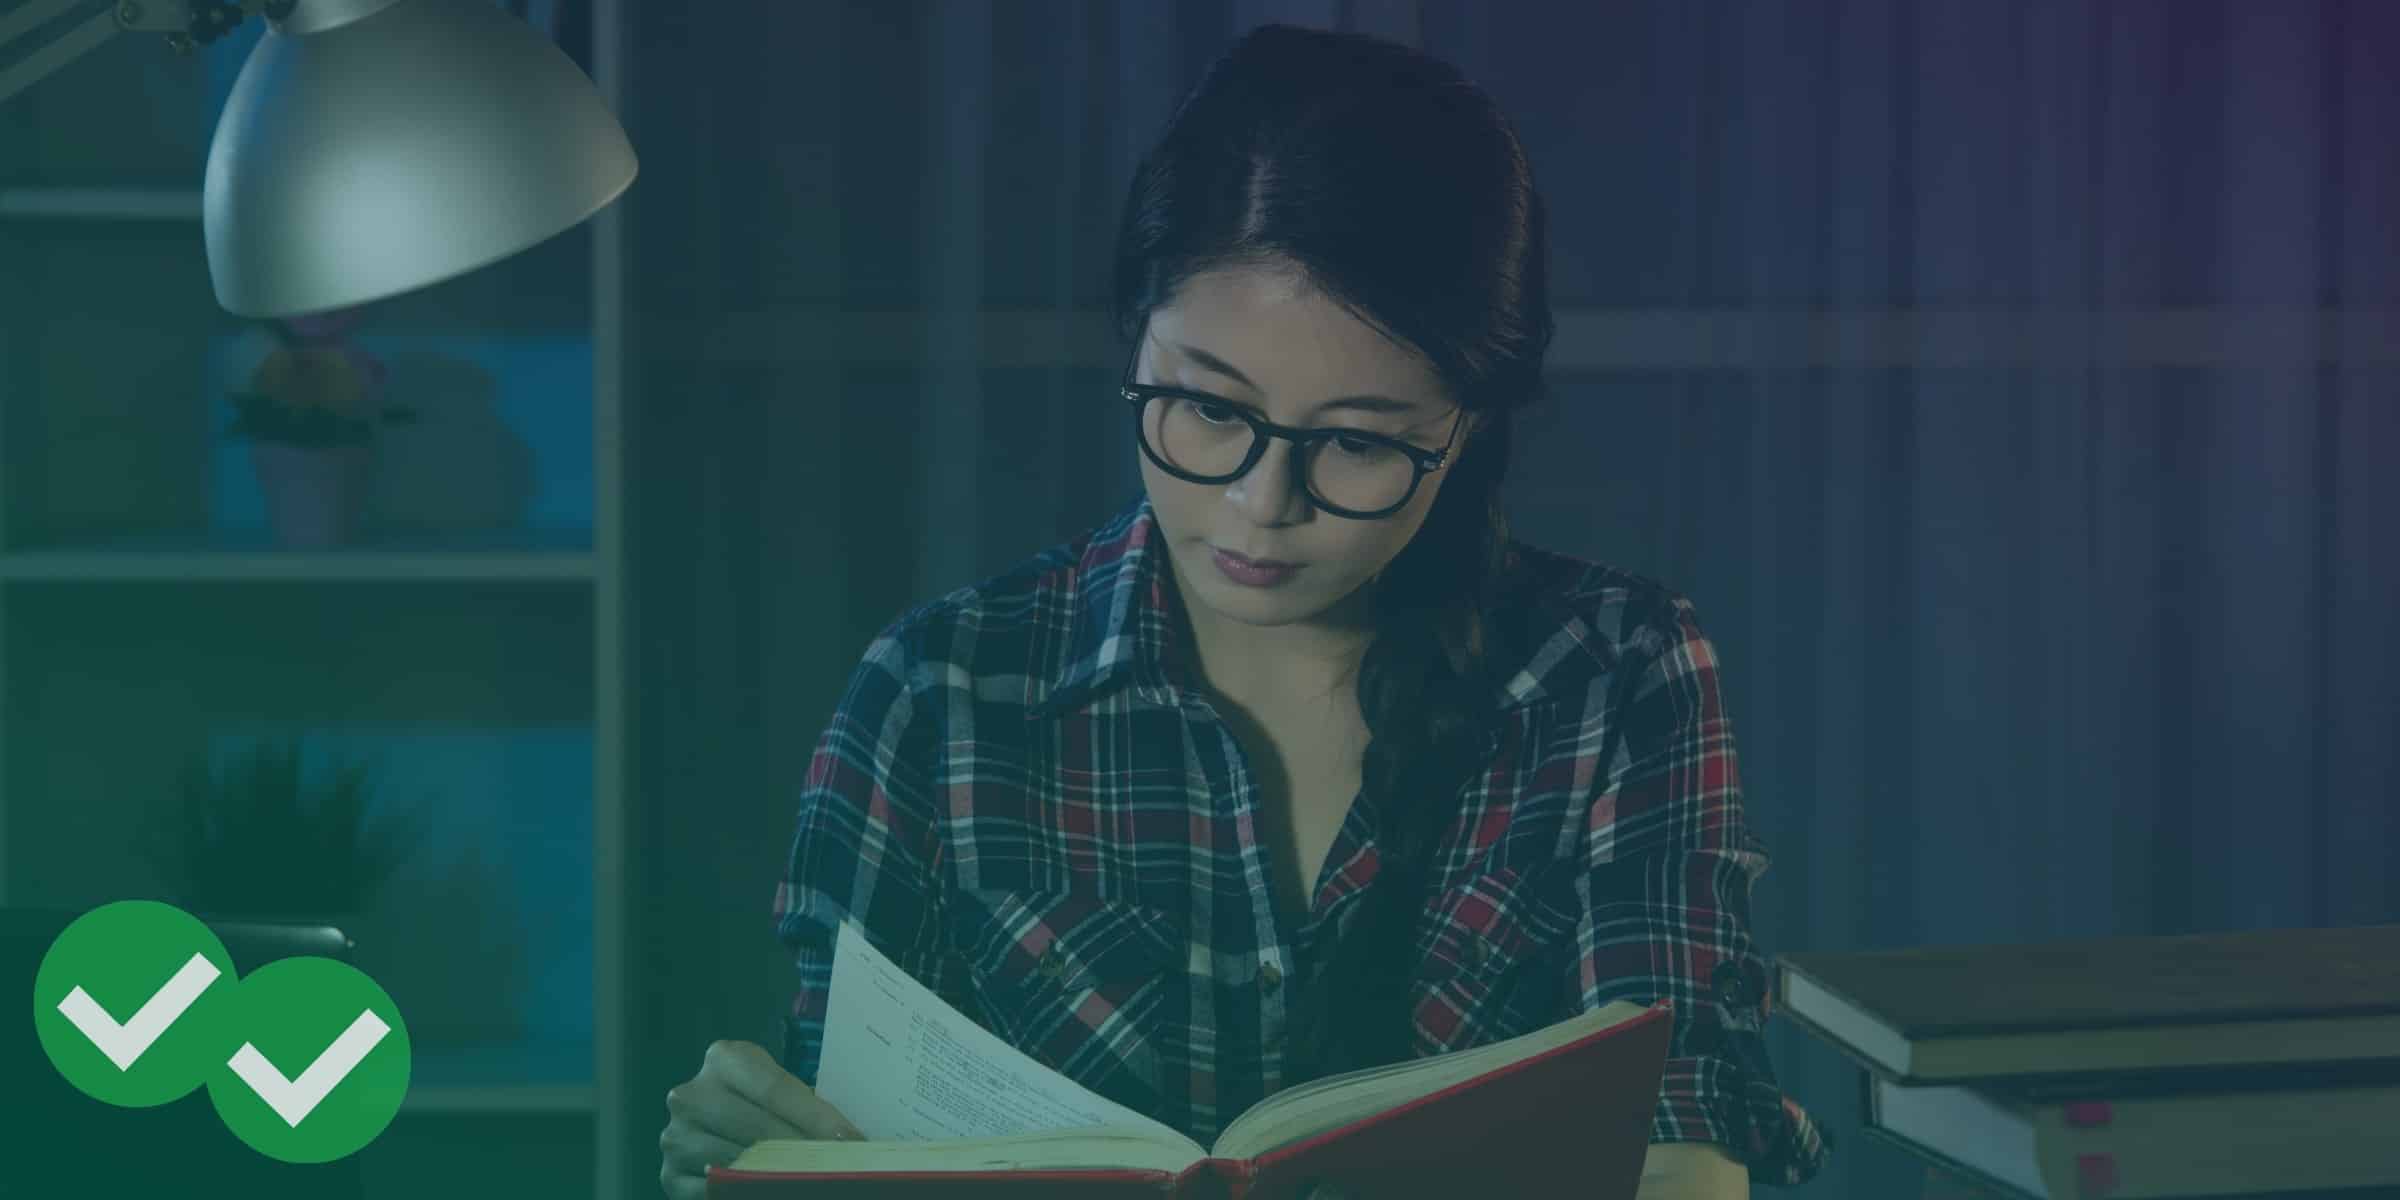 Woman wearing glasses and flipping through a book, with bookshelf and plants in the background, representing pulling a successful all-nighter - image by Magoosh